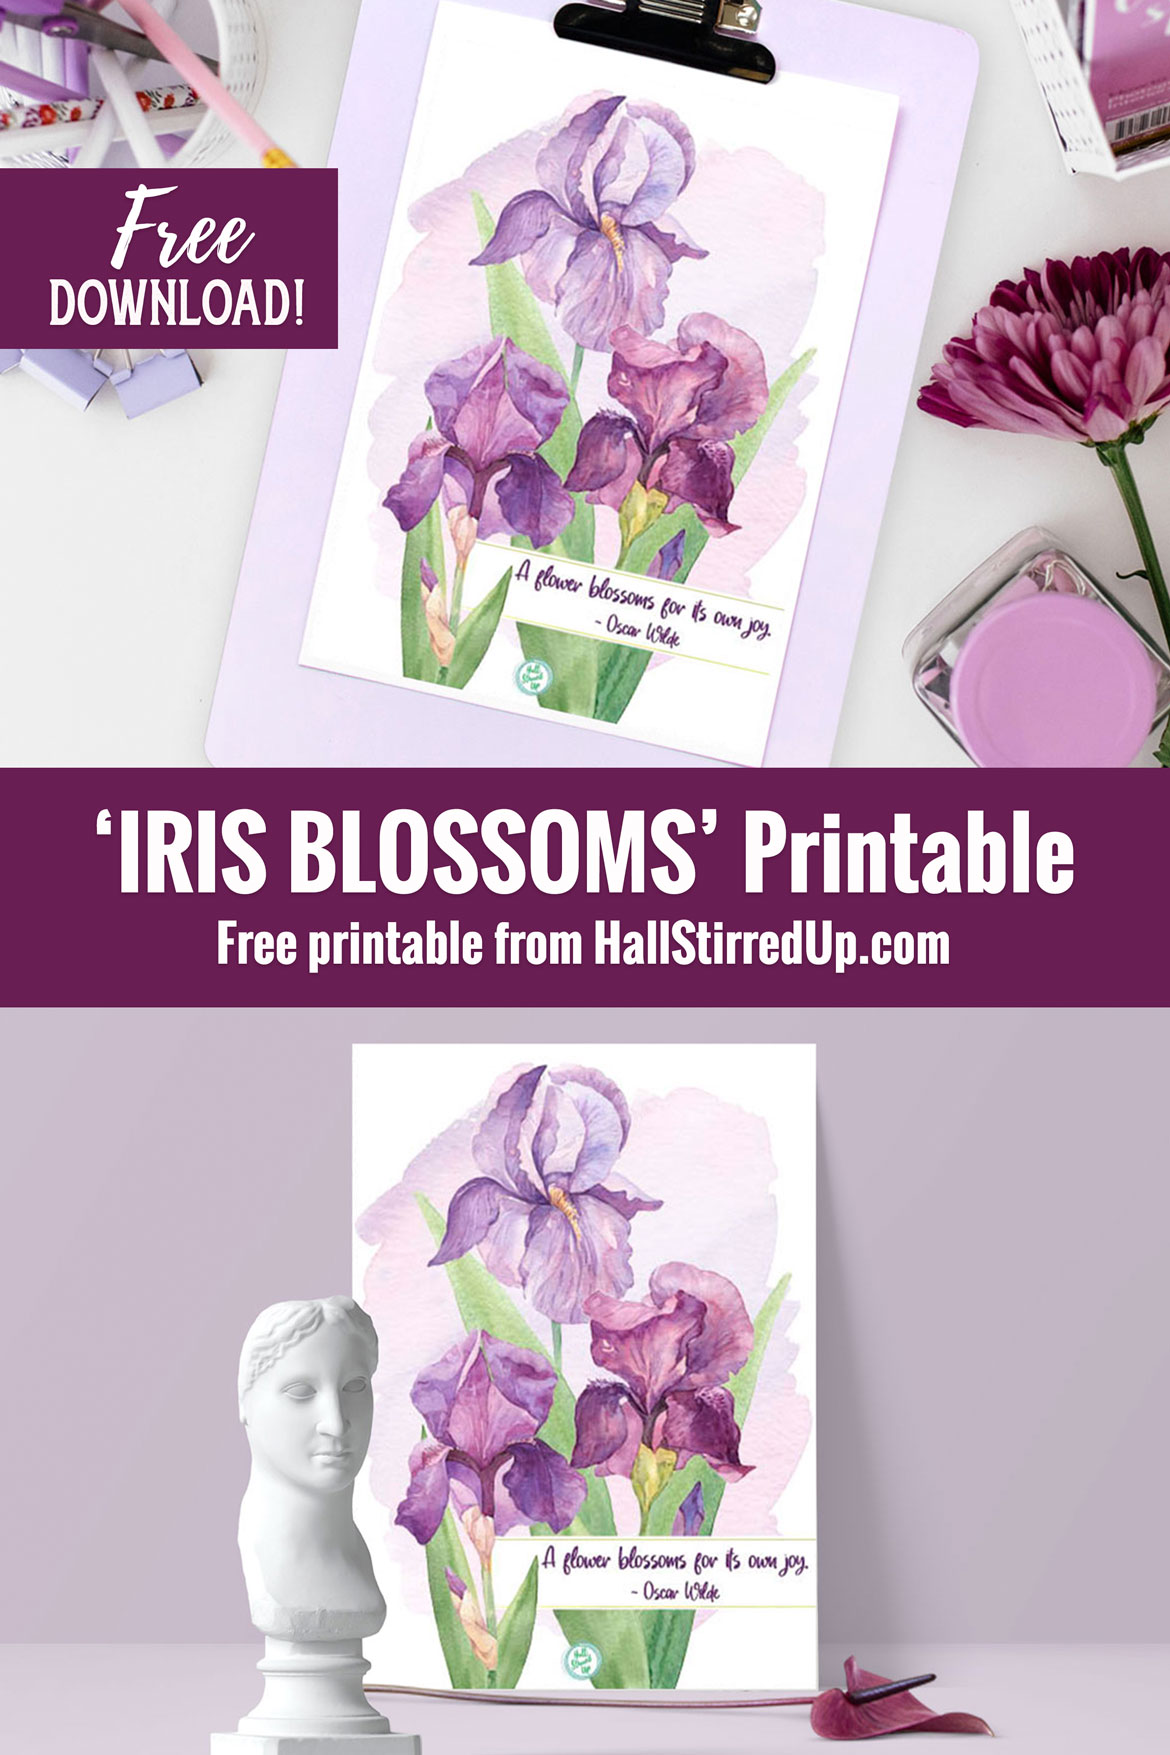 Beautiful Iris blossoms and a pretty free printable